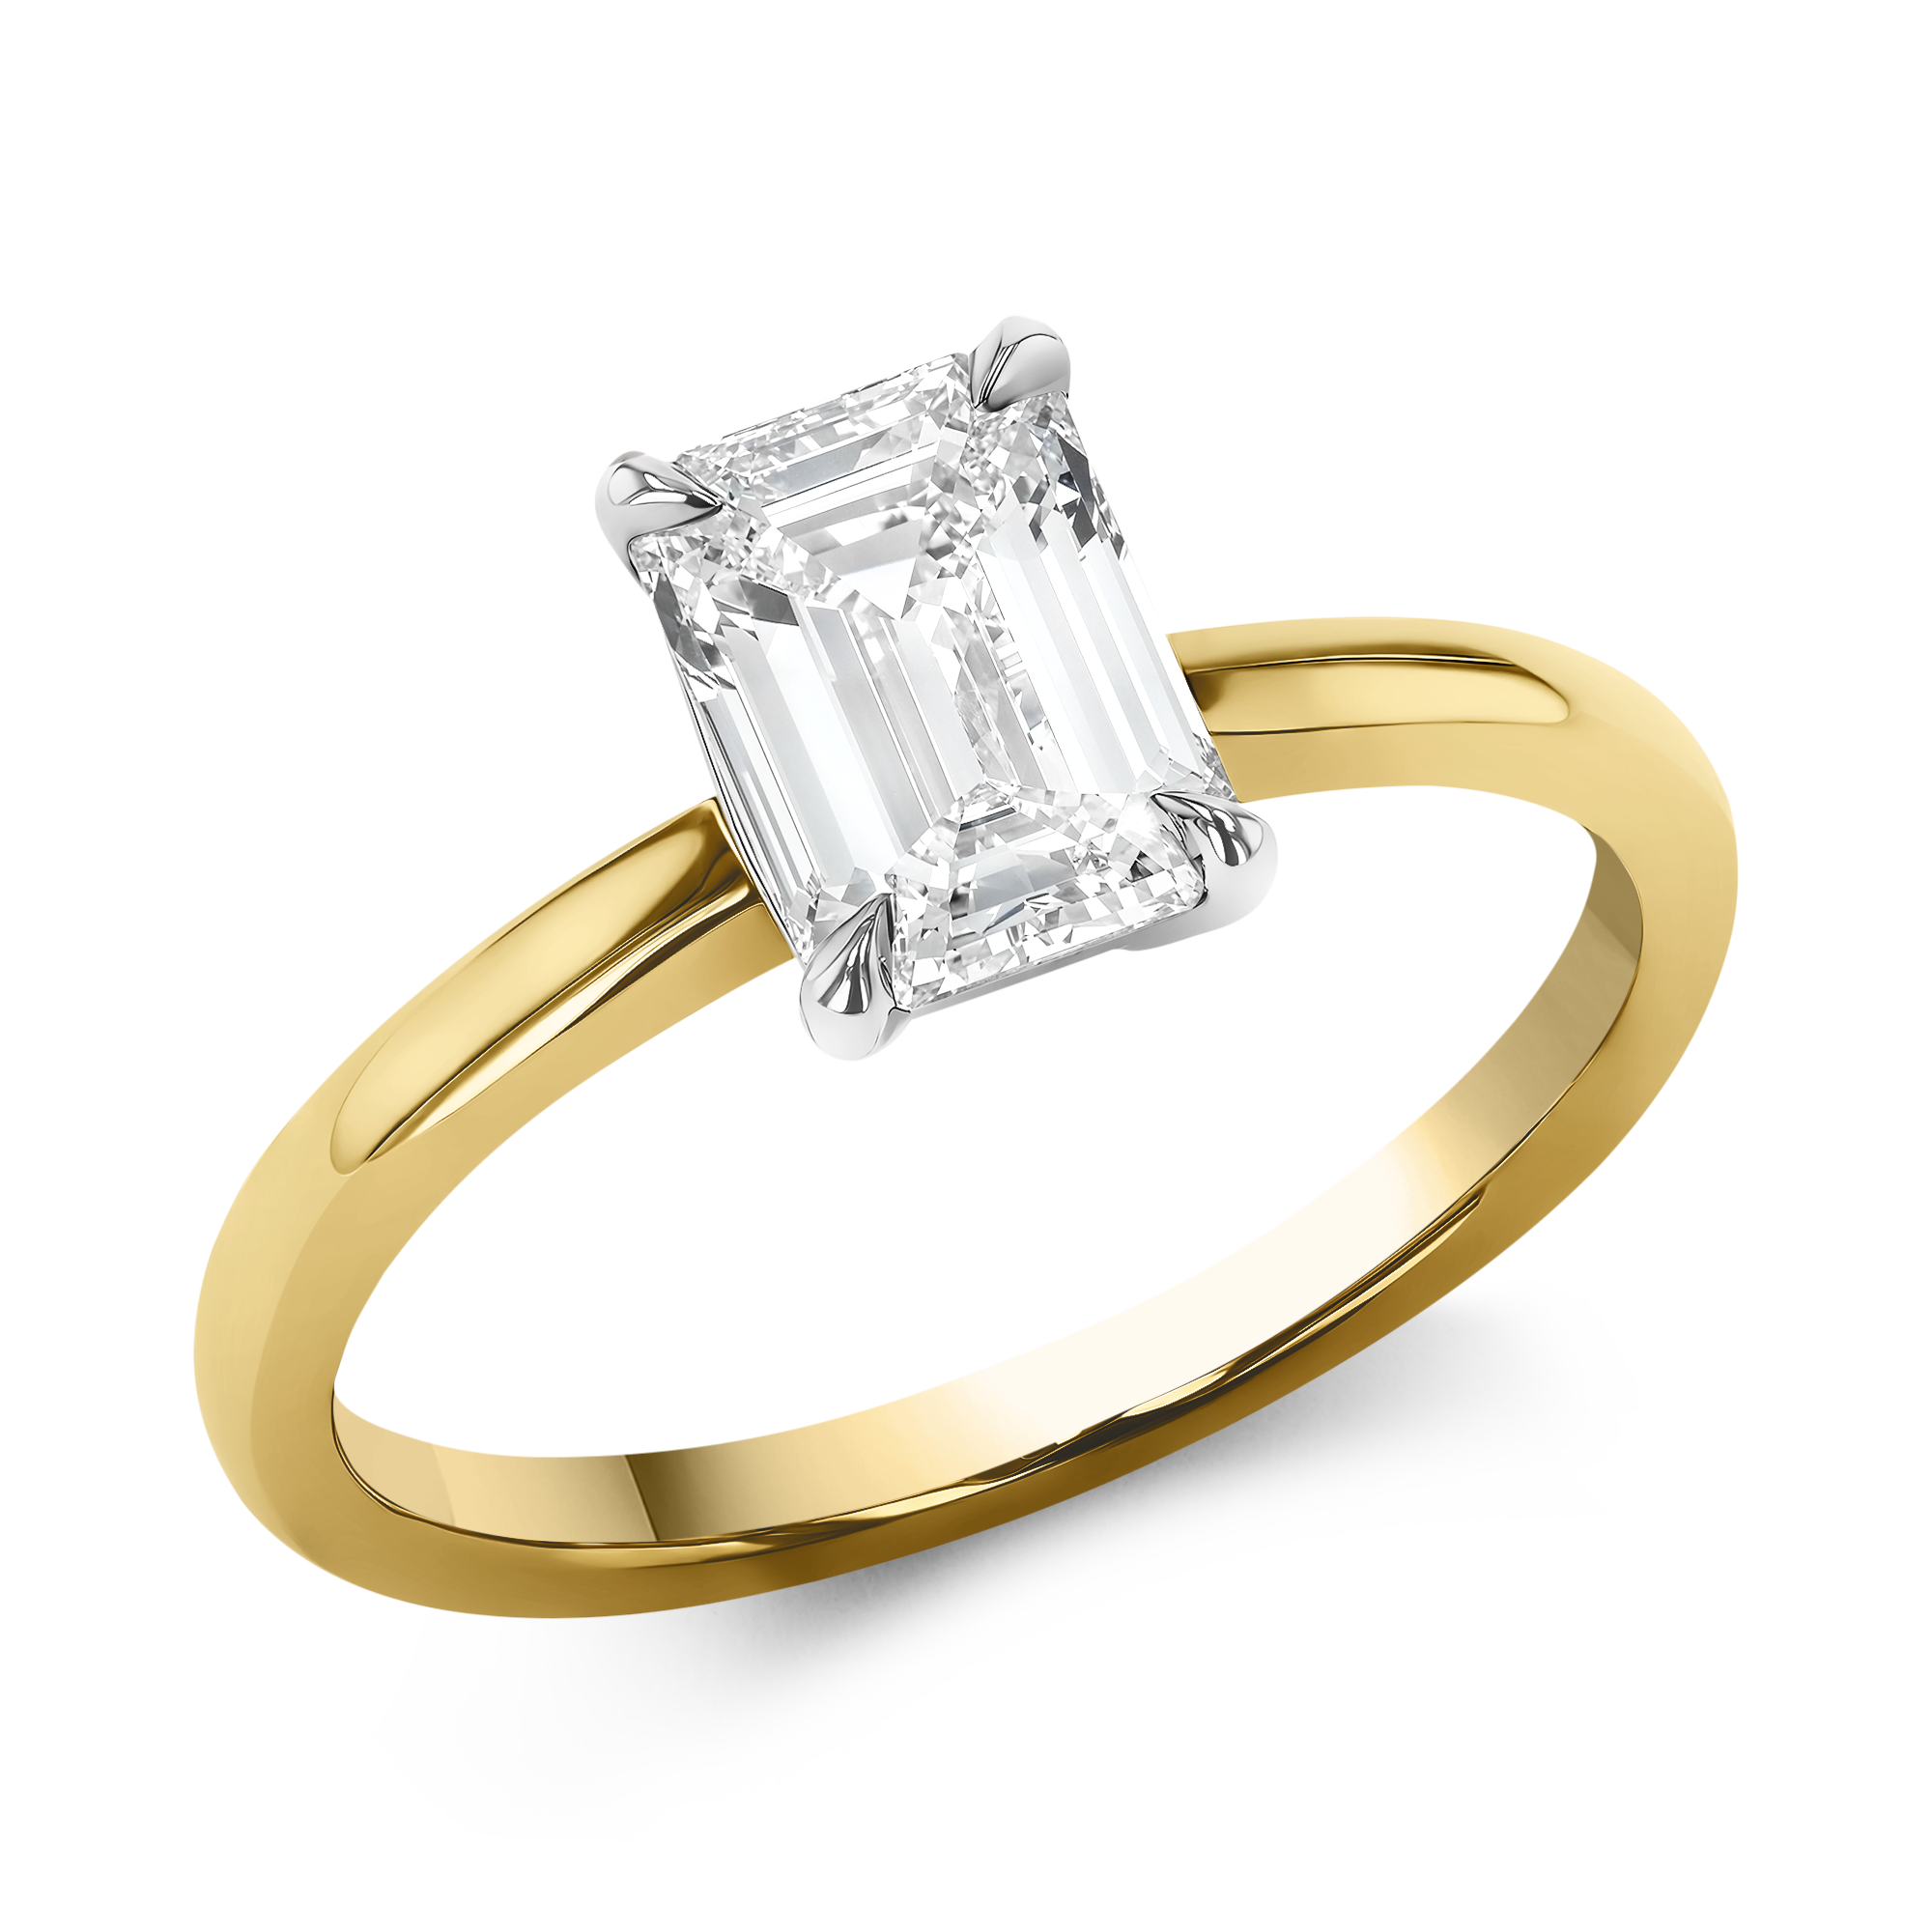 Classic 1.51ct Diamond Solitaire Ring Emerald Cut, Claw Set_1